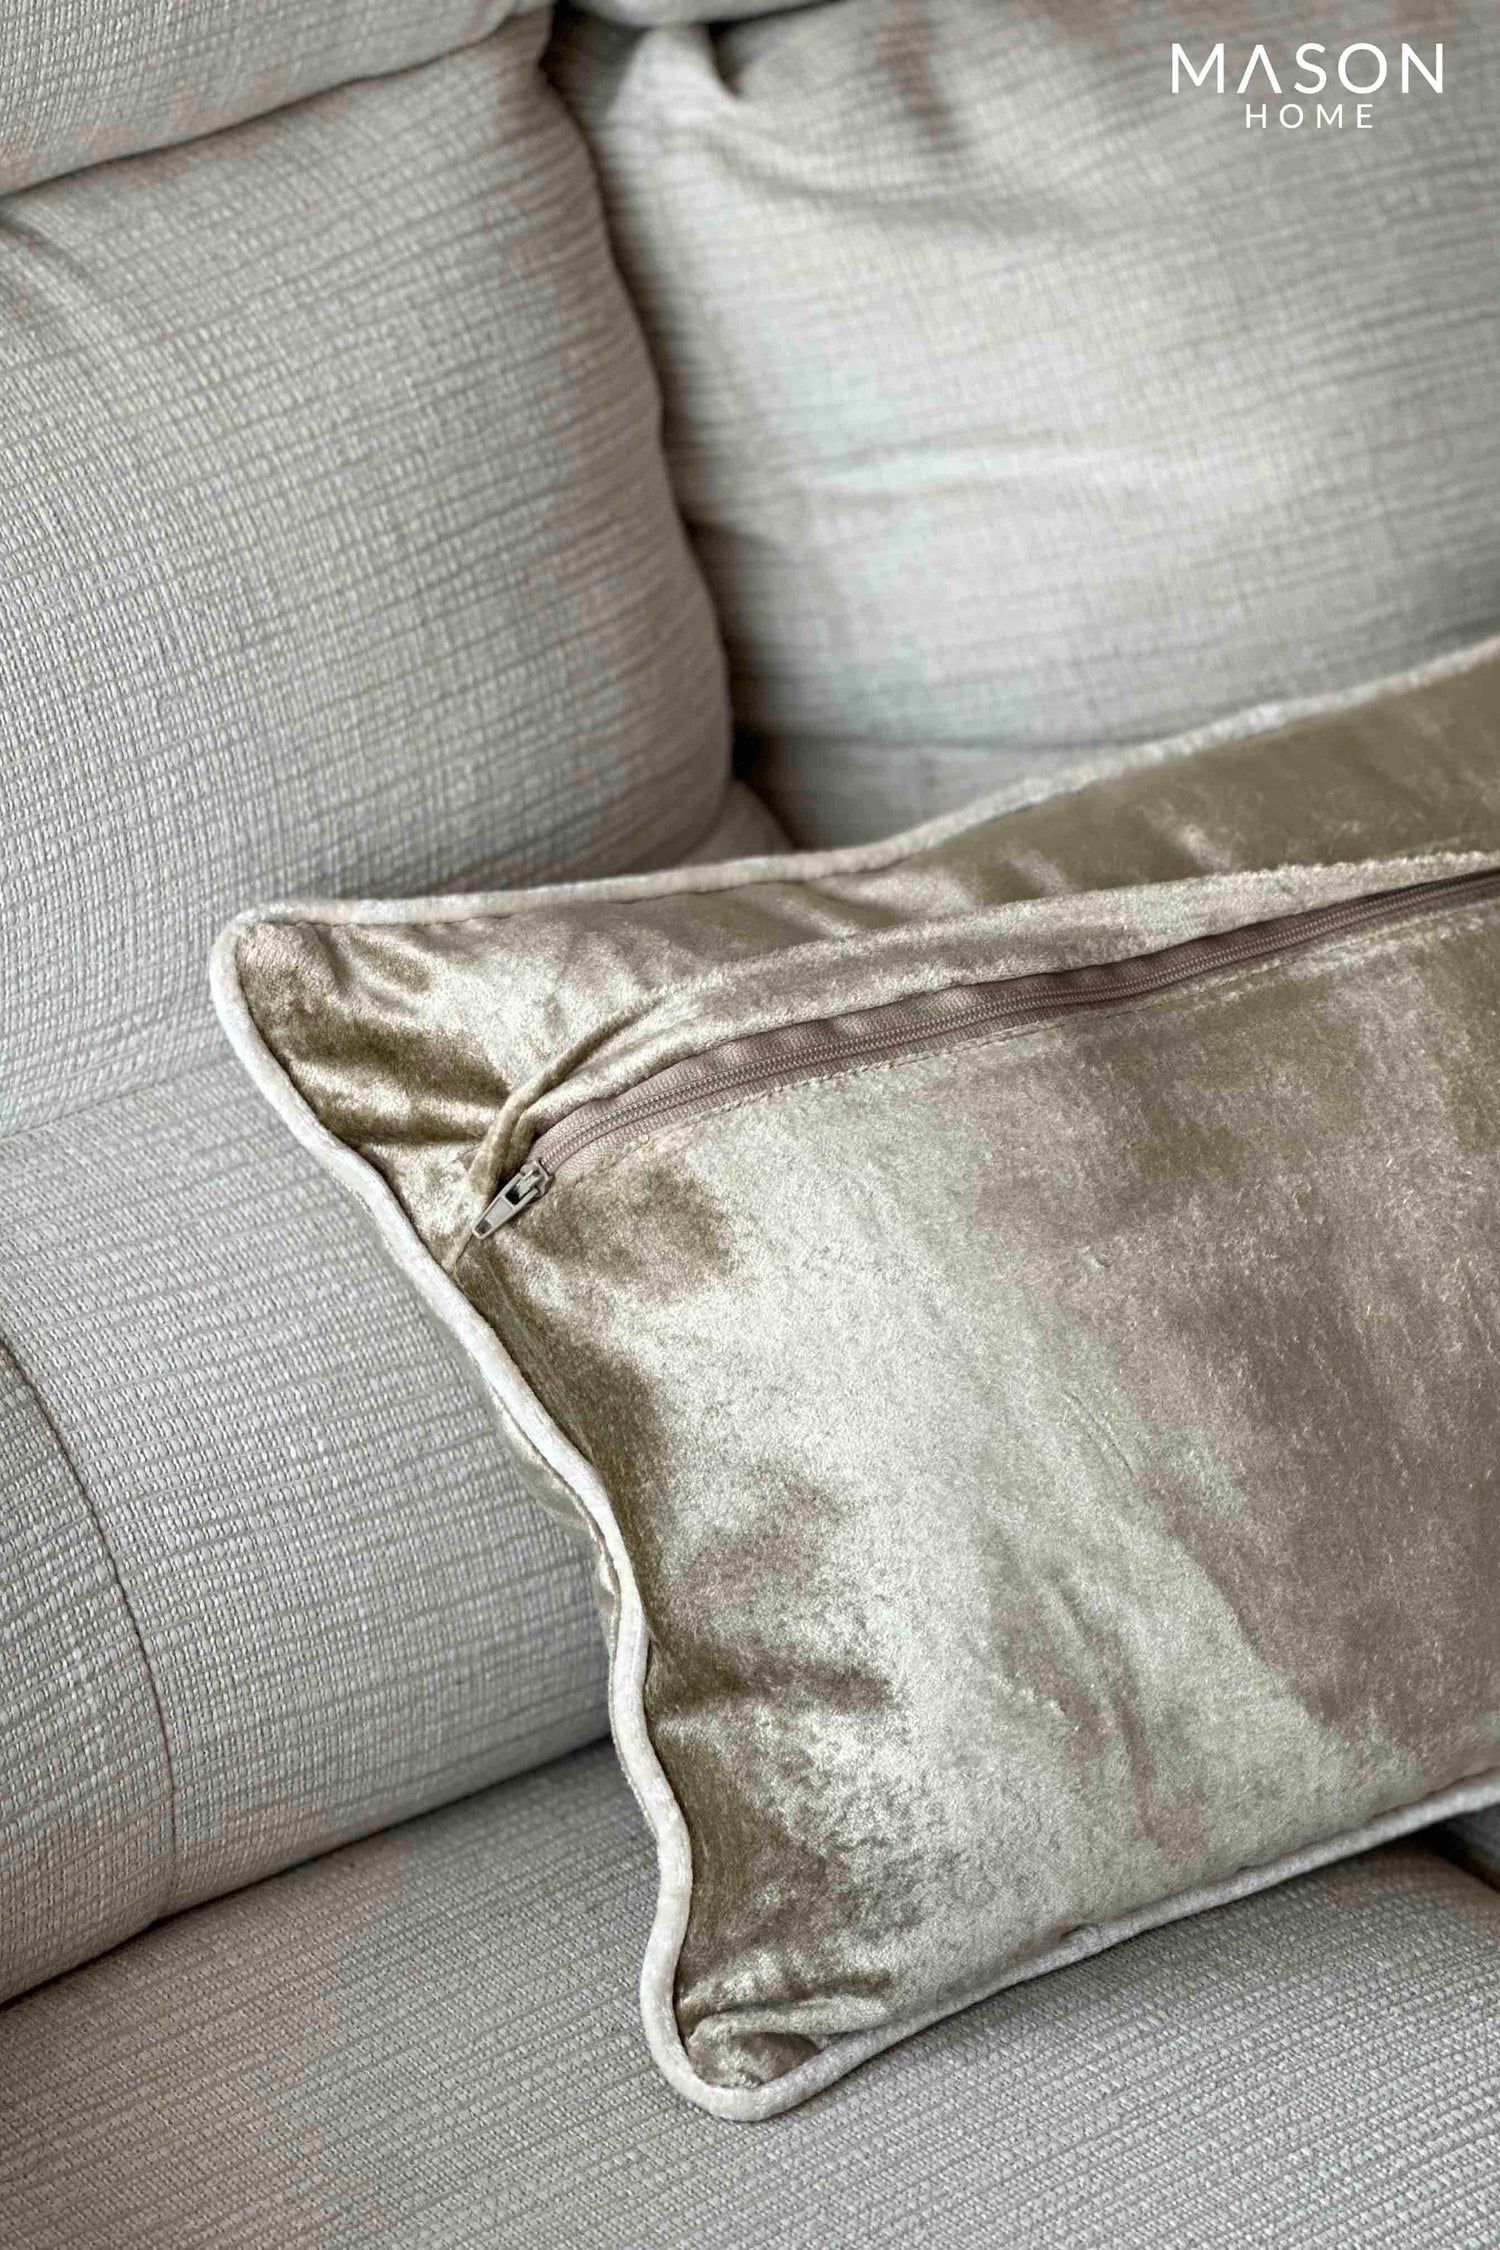 Champagne Gold Bees Throw Cushion Cover